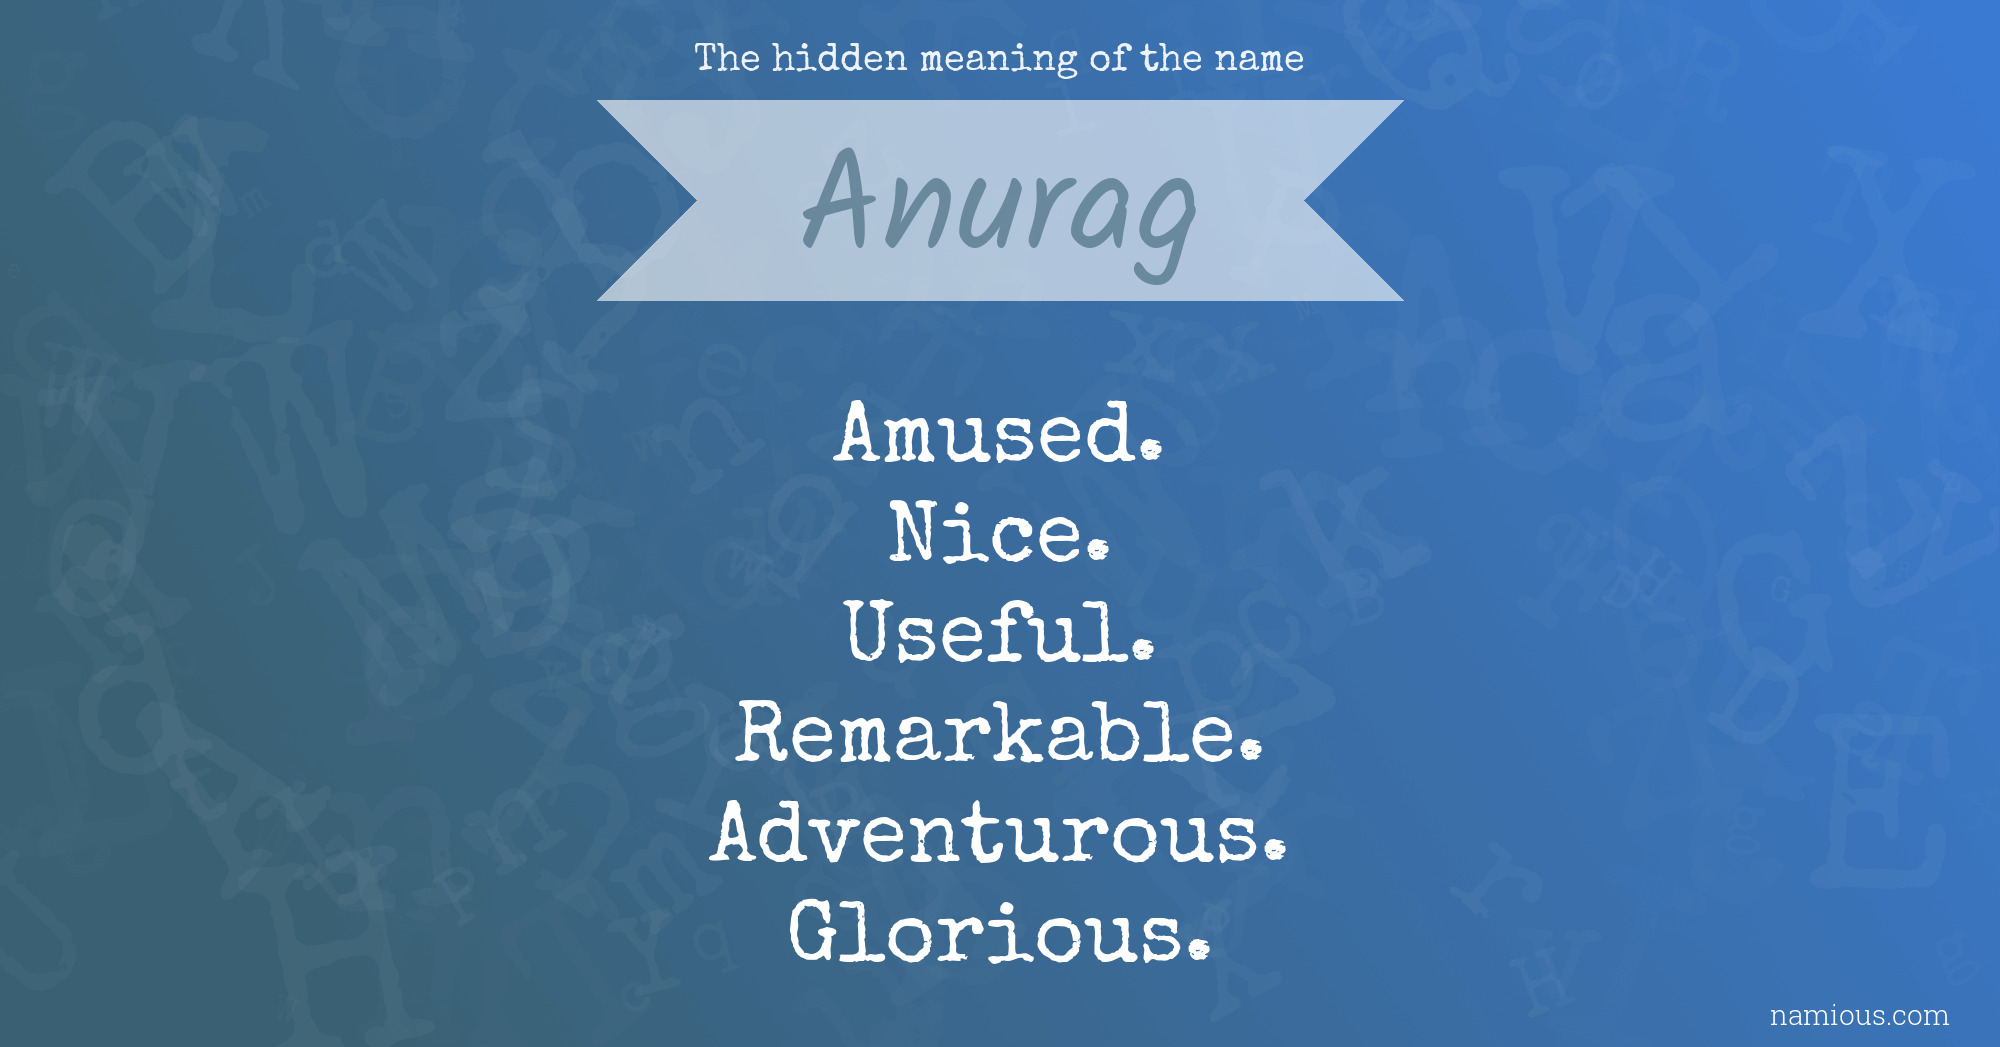 The hidden meaning of the name Anurag